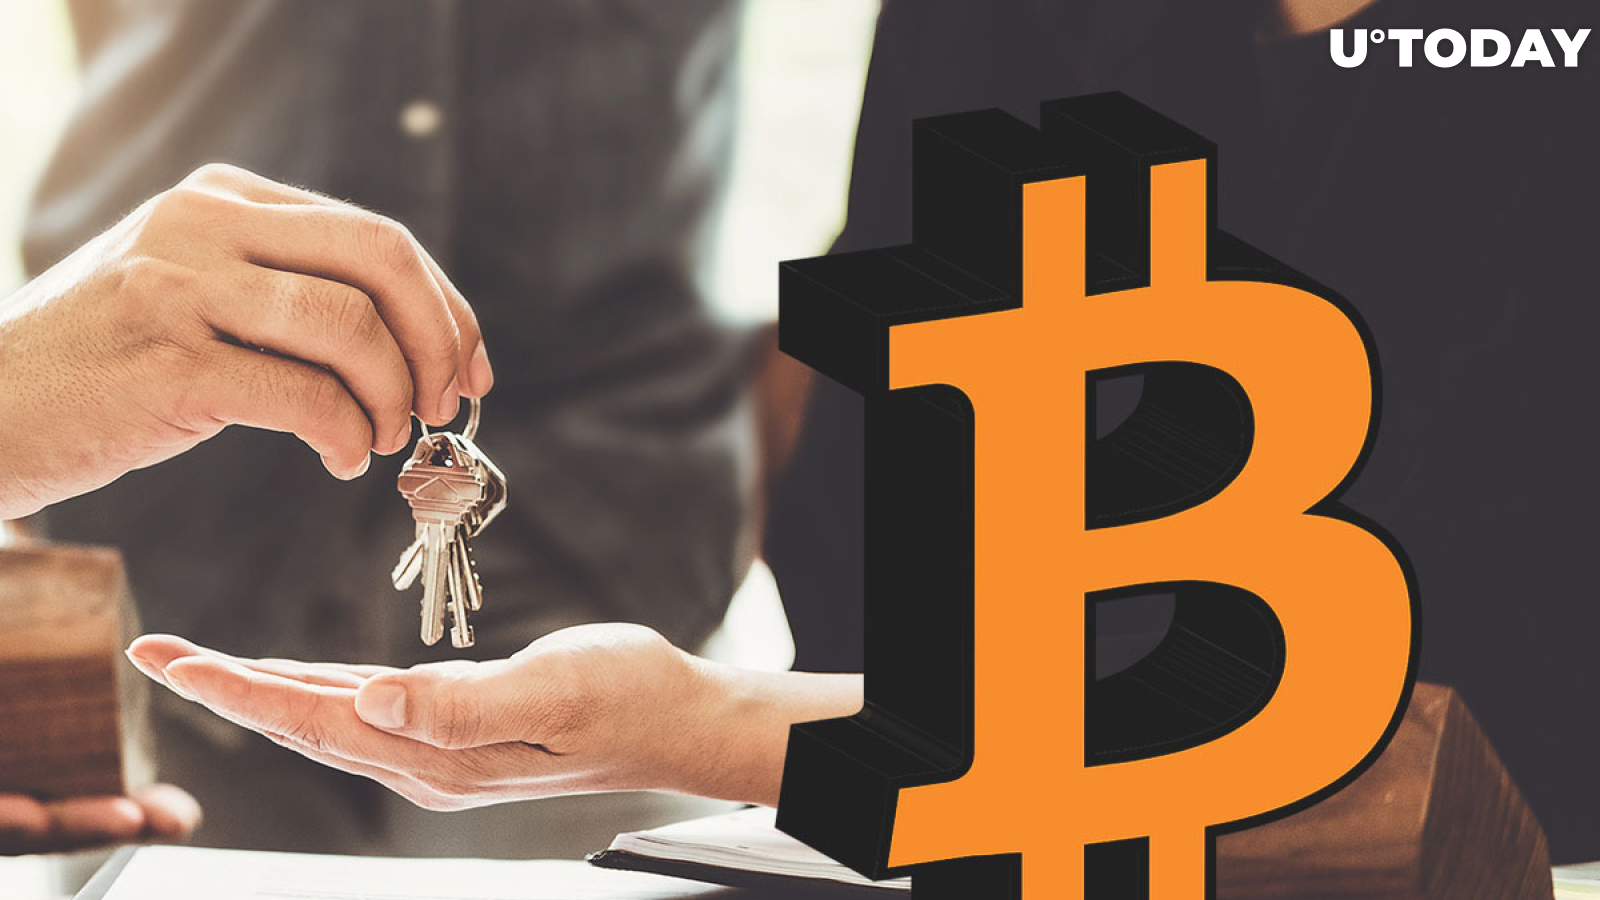 Canada's Leading Mortgage Brokerage Now Accepts Bitcoin, Ethereum, XRP, and Bitcoin Cash